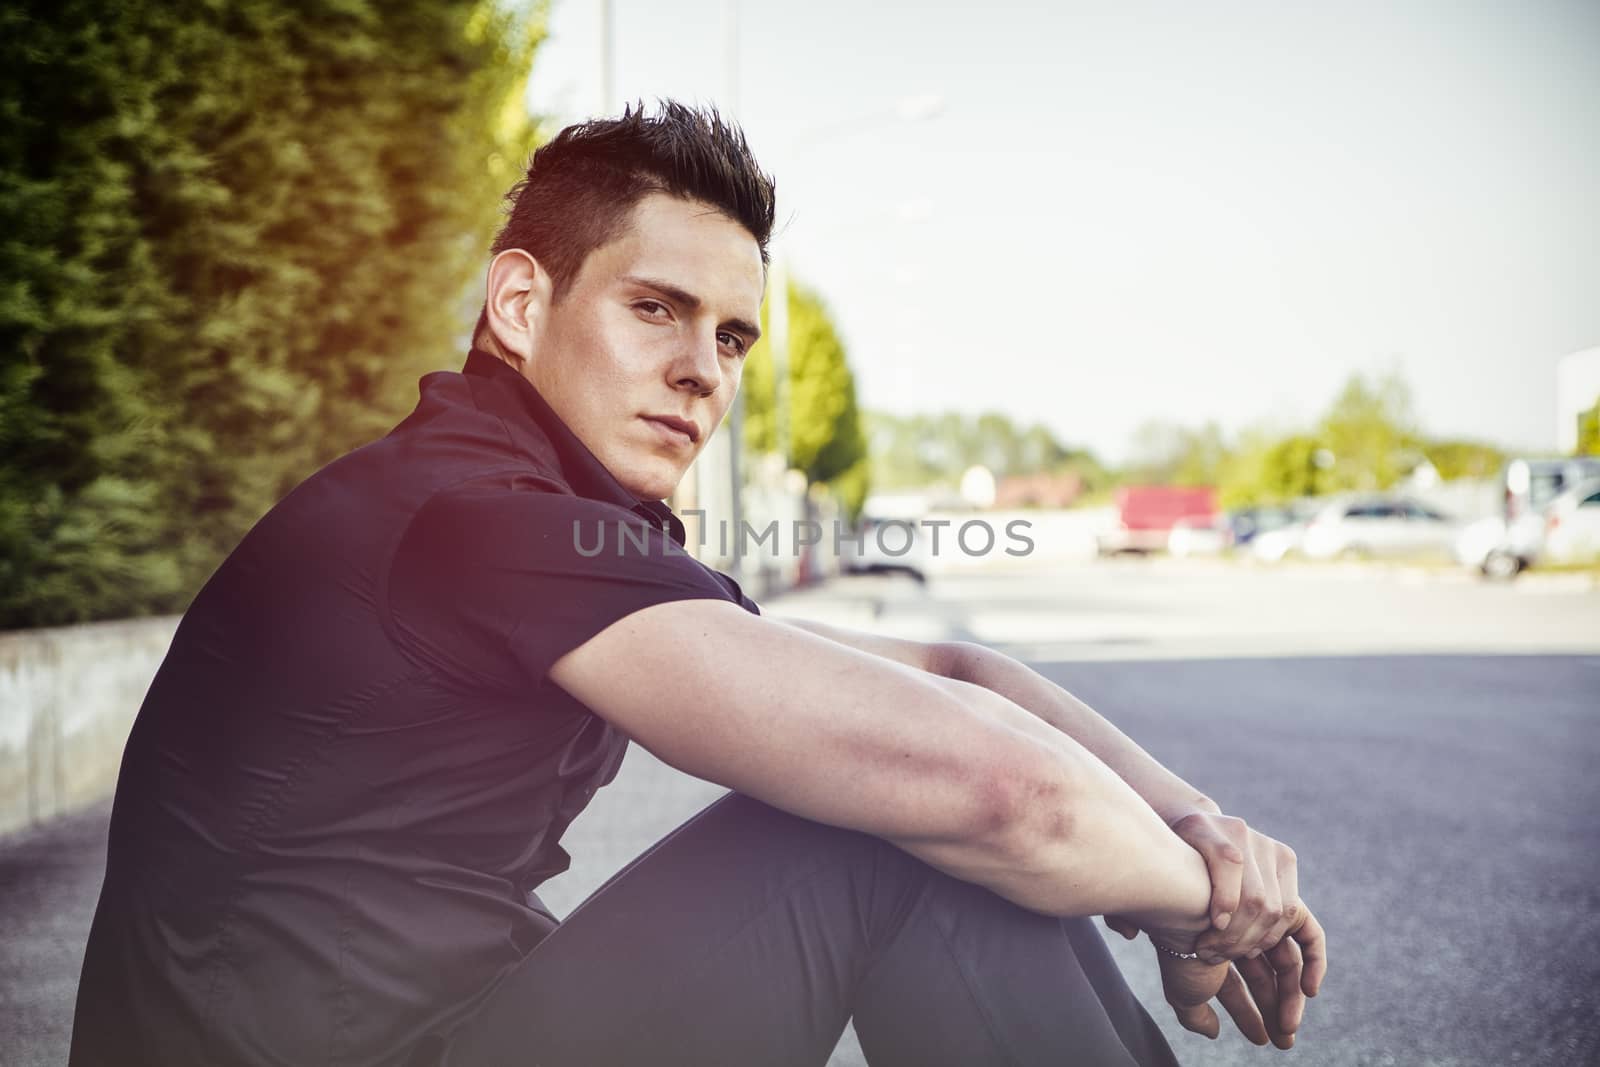 Handsome muscular young man in black shirt sitting outdoor in street looking at camera